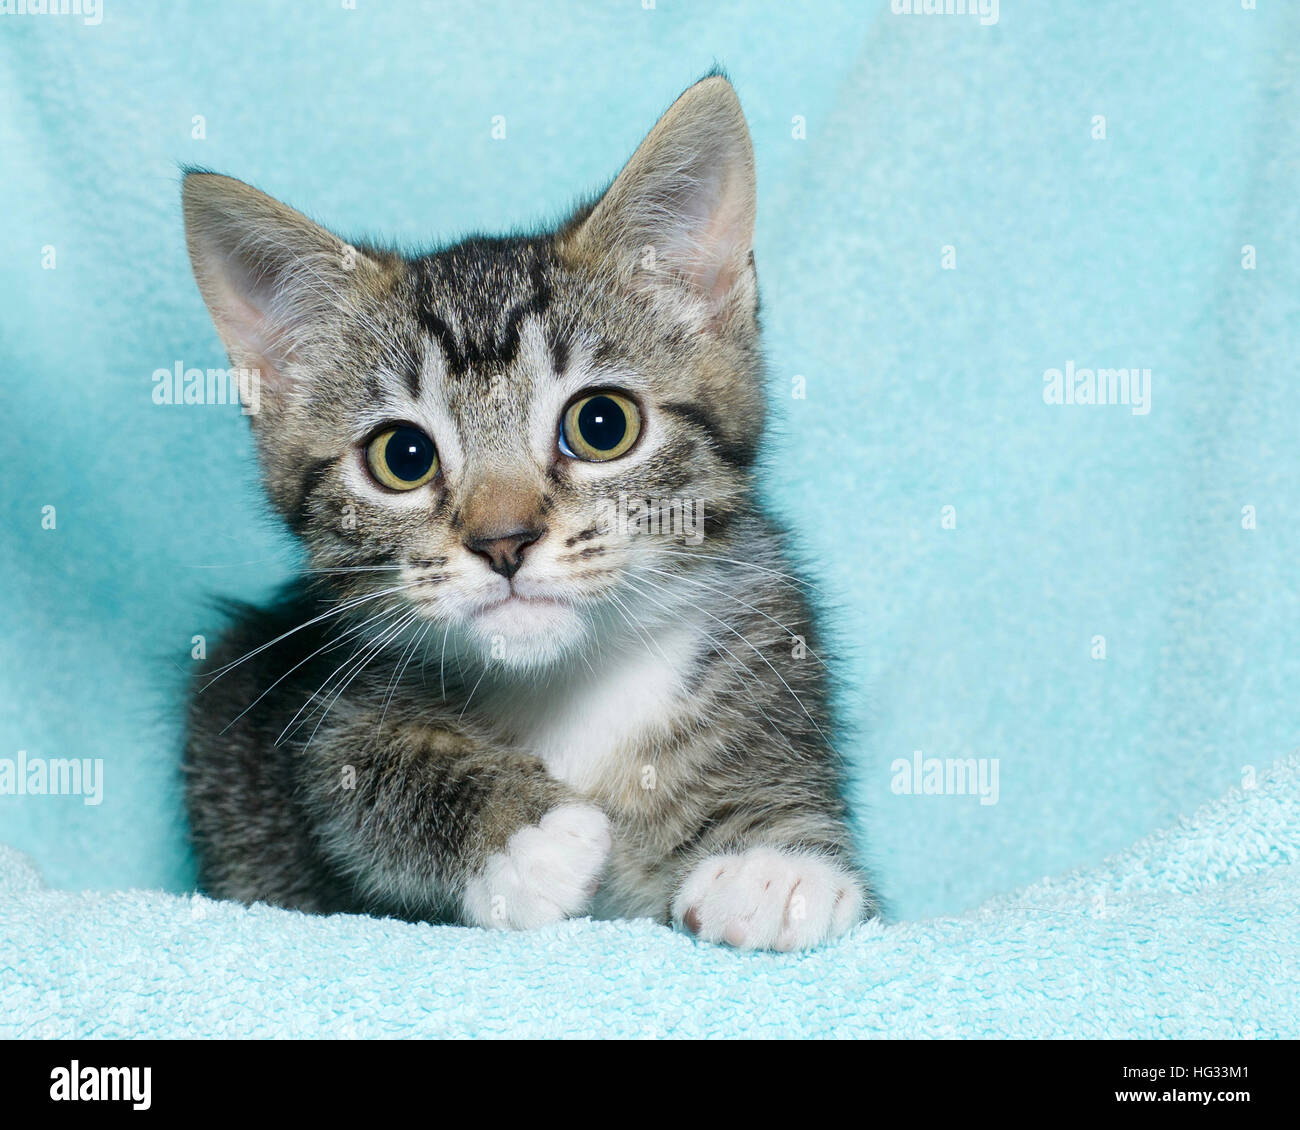 young six week old black and white tabby kitten sitting laying on an aqua teal colored blanket resting watching looking forward with concerned perplex Stock Photo